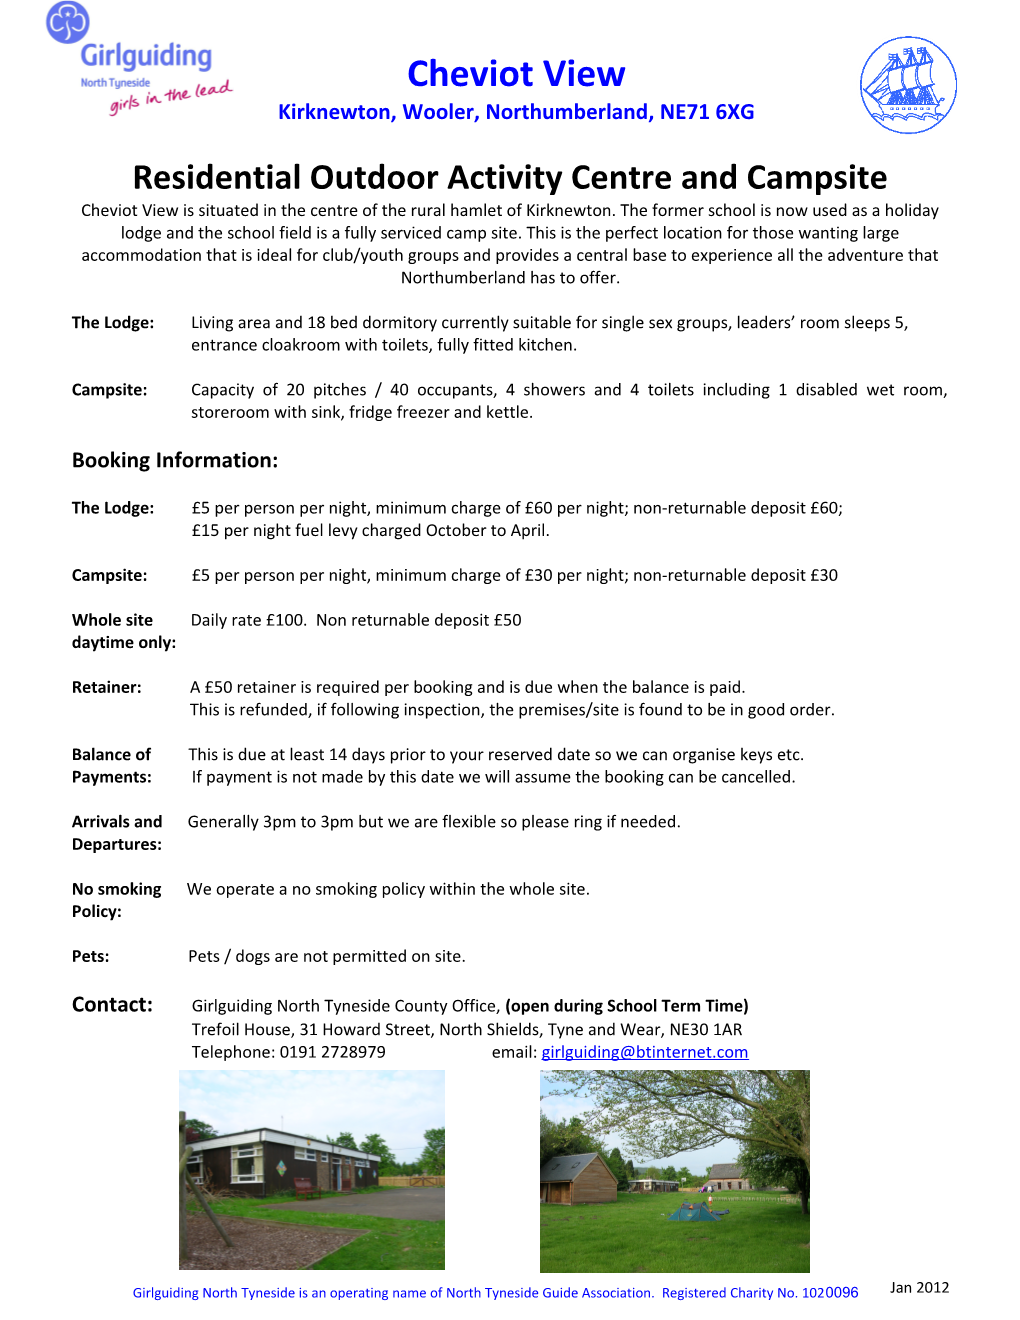 Residential Outdoor Activity Centre and Campsite